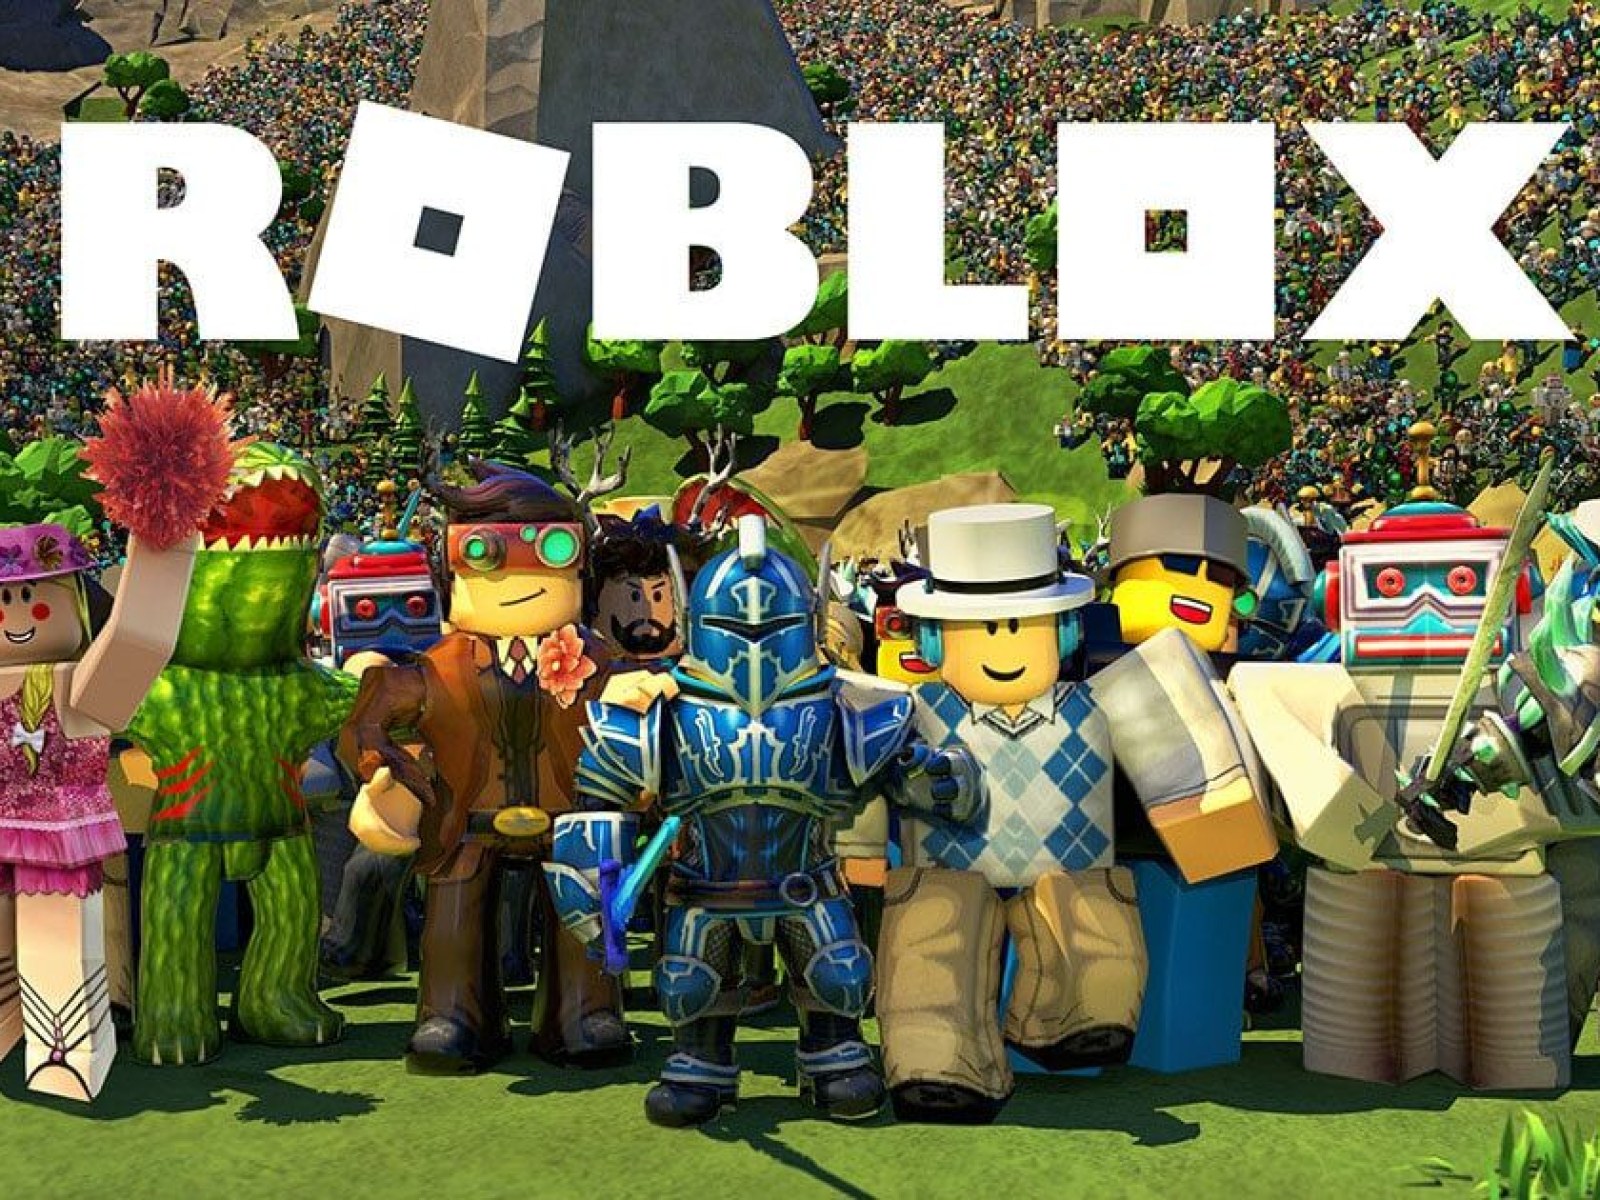 Roblox And Nfl Team Up To Give Players Free Team Helmets Here S How To Get One - roblox skins images